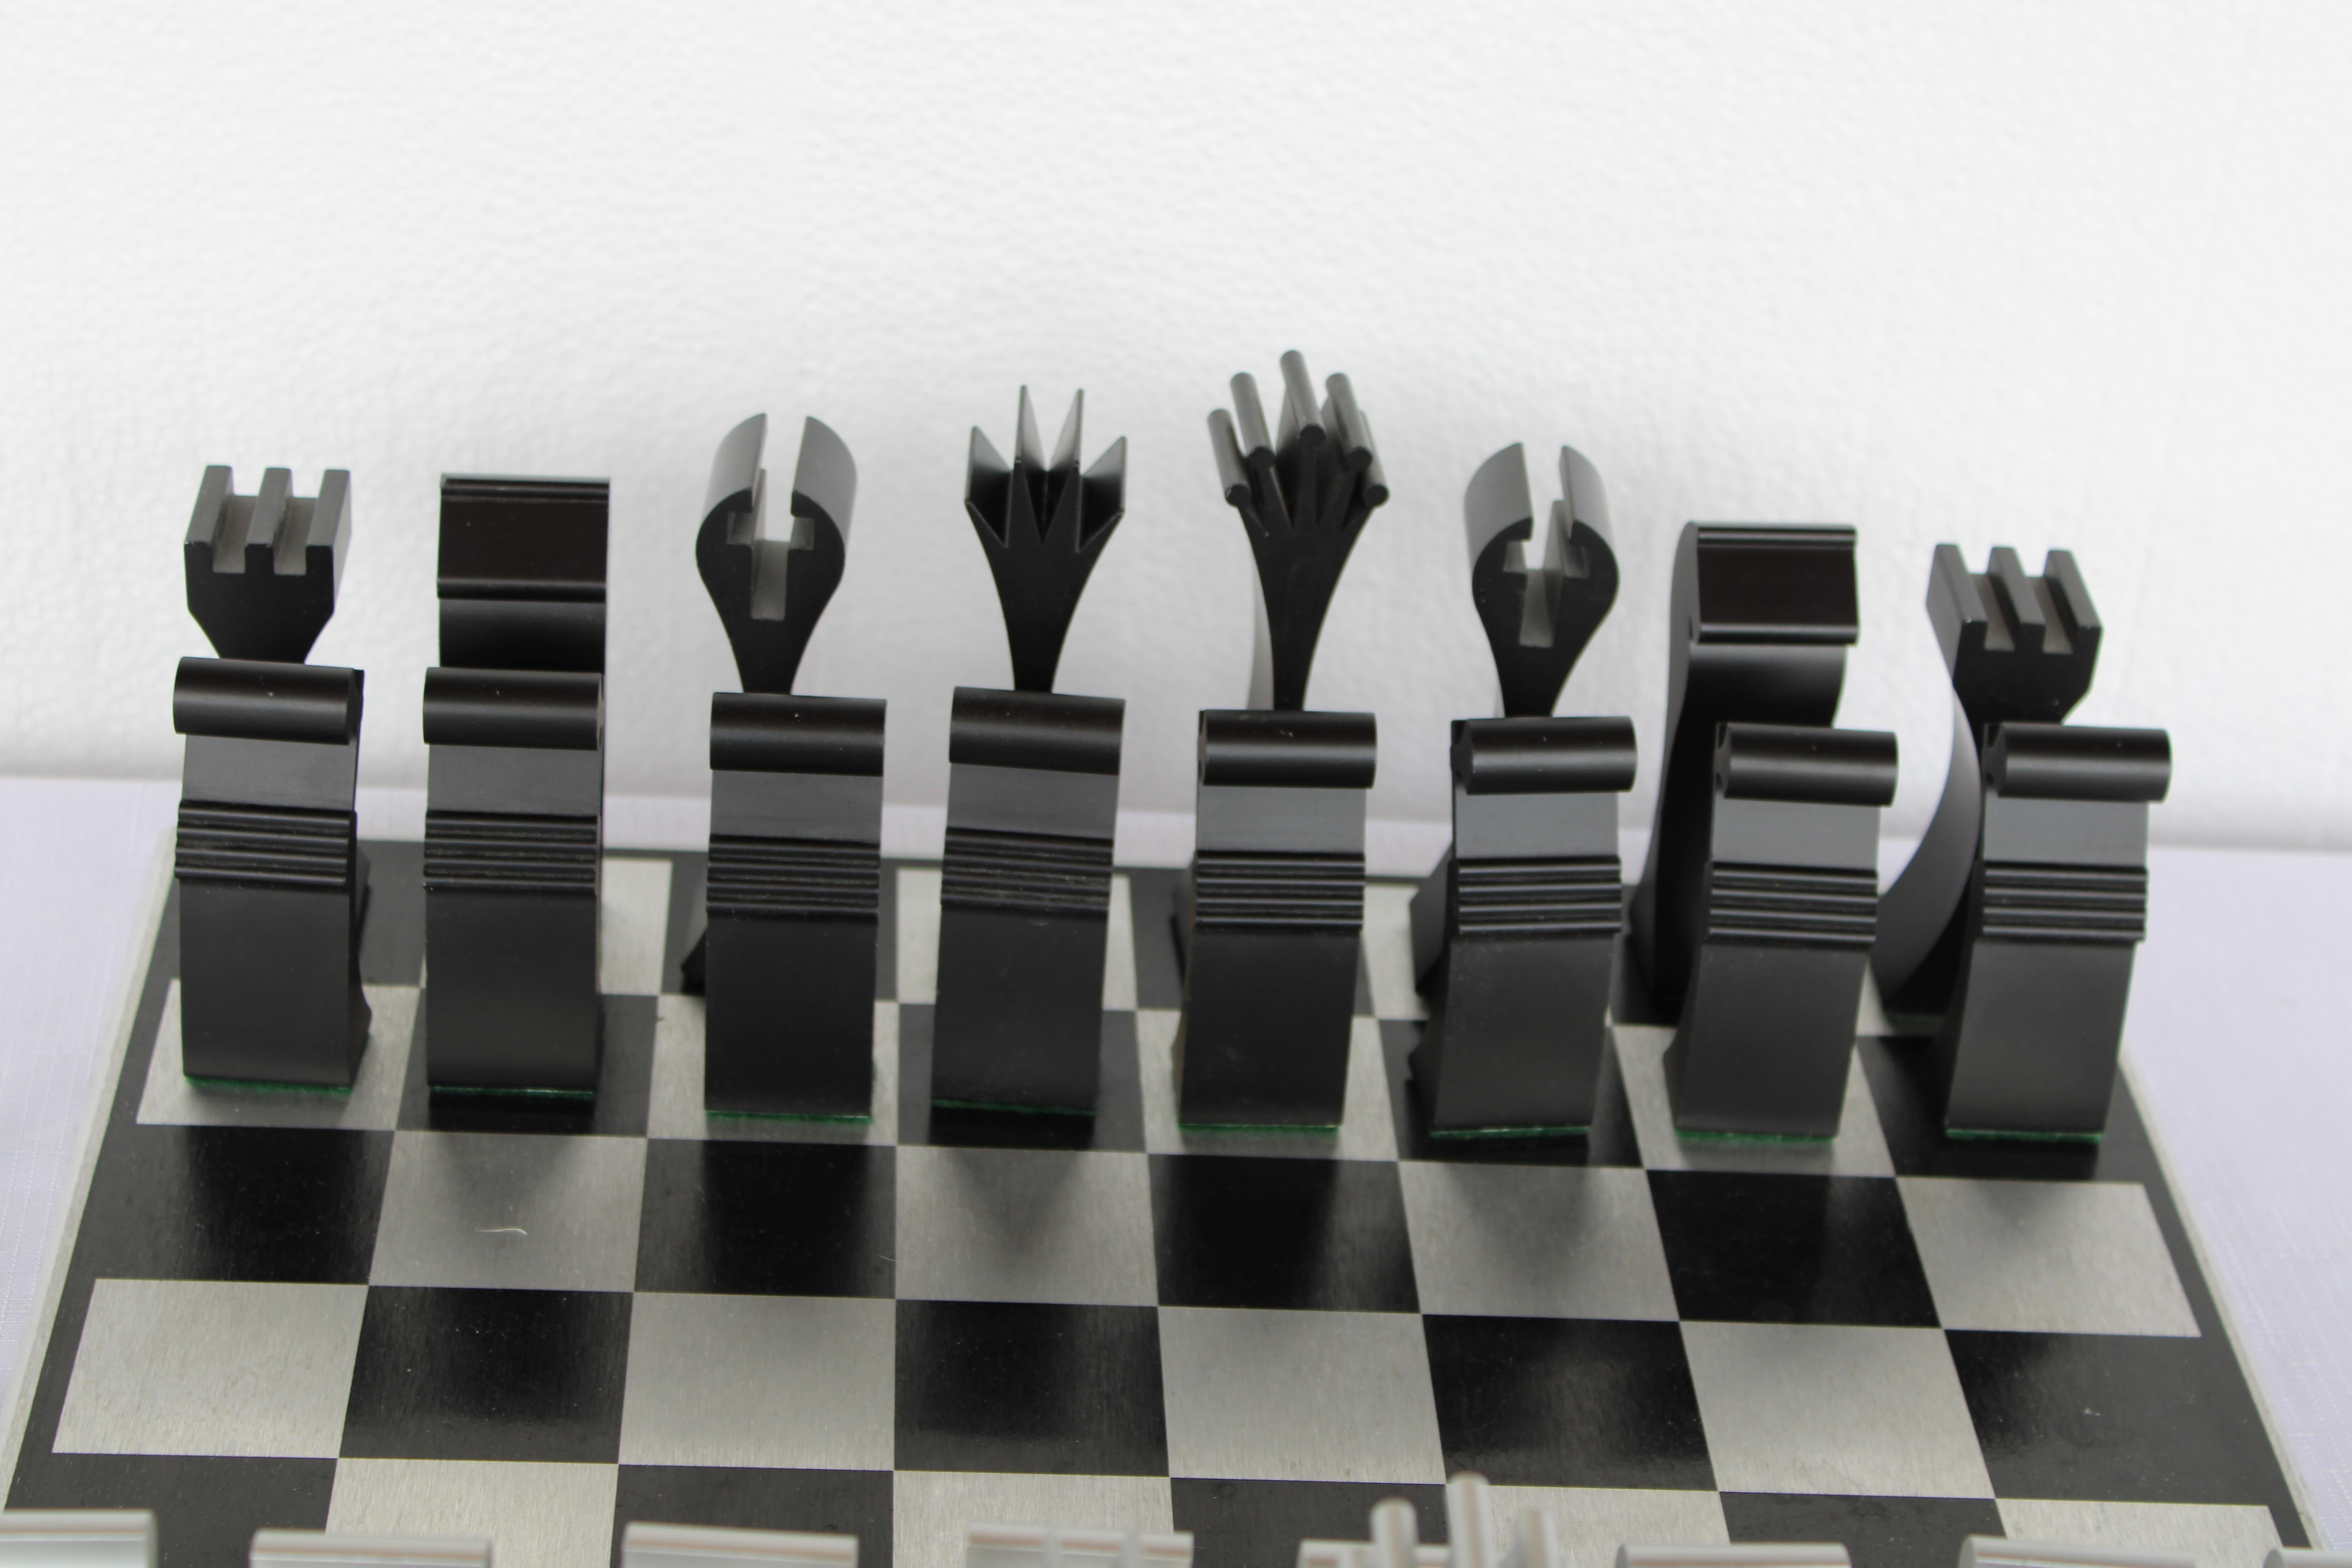 Columbia aluminum chess set by Scott Wolfe.  Chess board measures 15.75